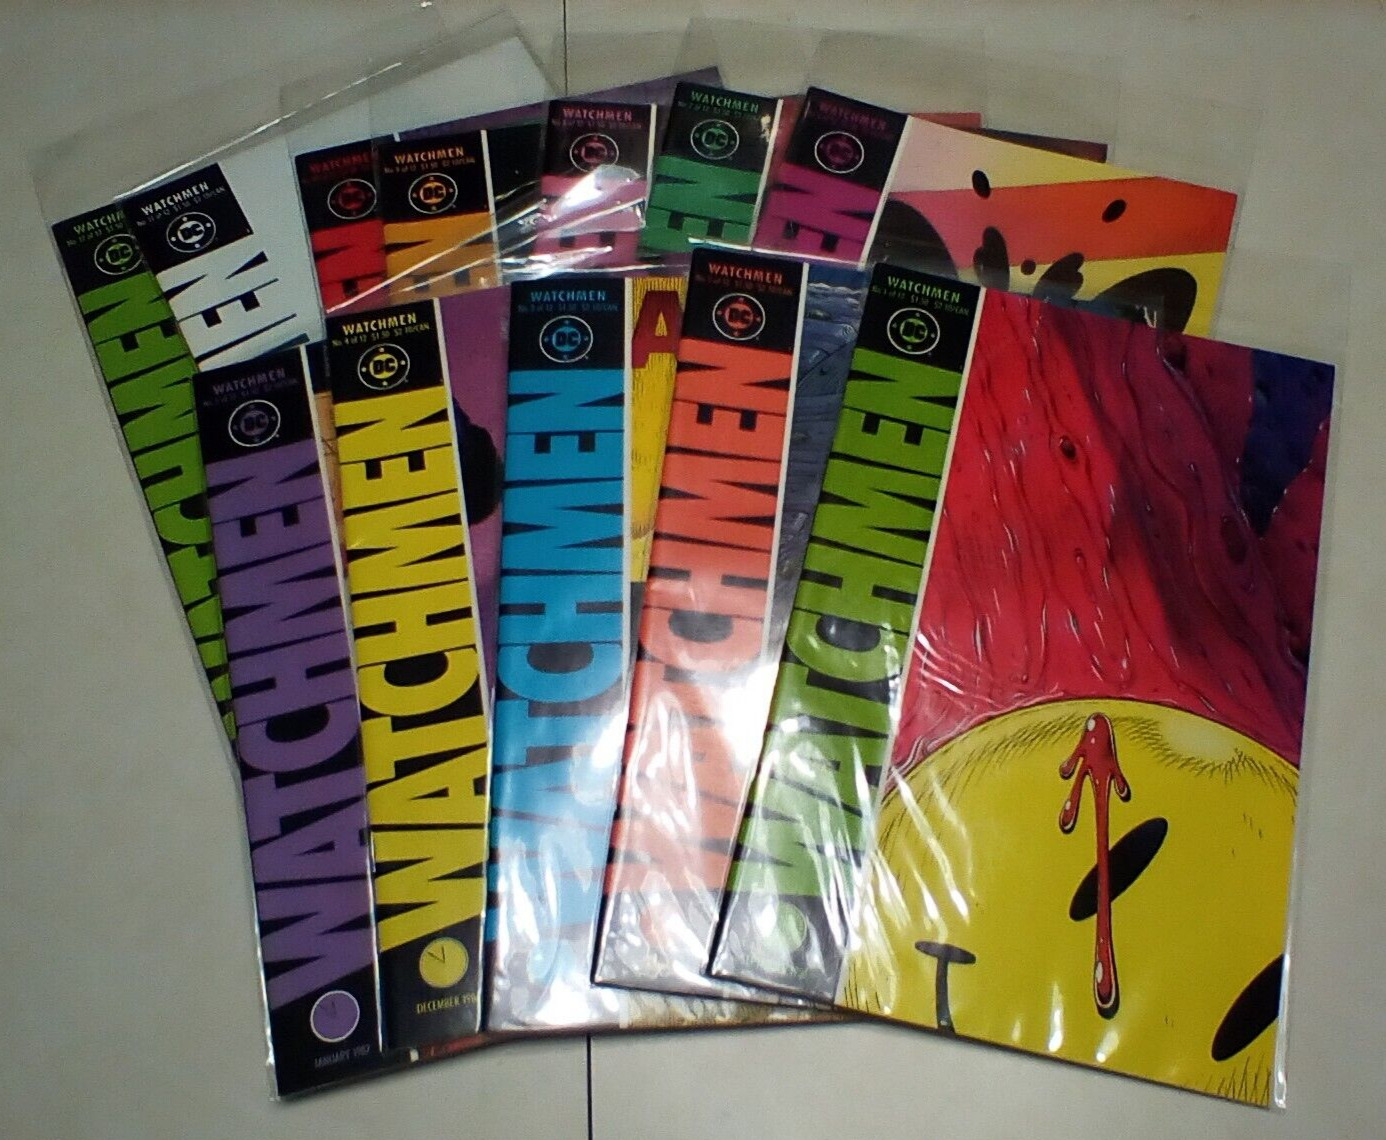 Watchmen # 1-12 Complete series (DC)1986 - Alan Moore - avg VF+ or better